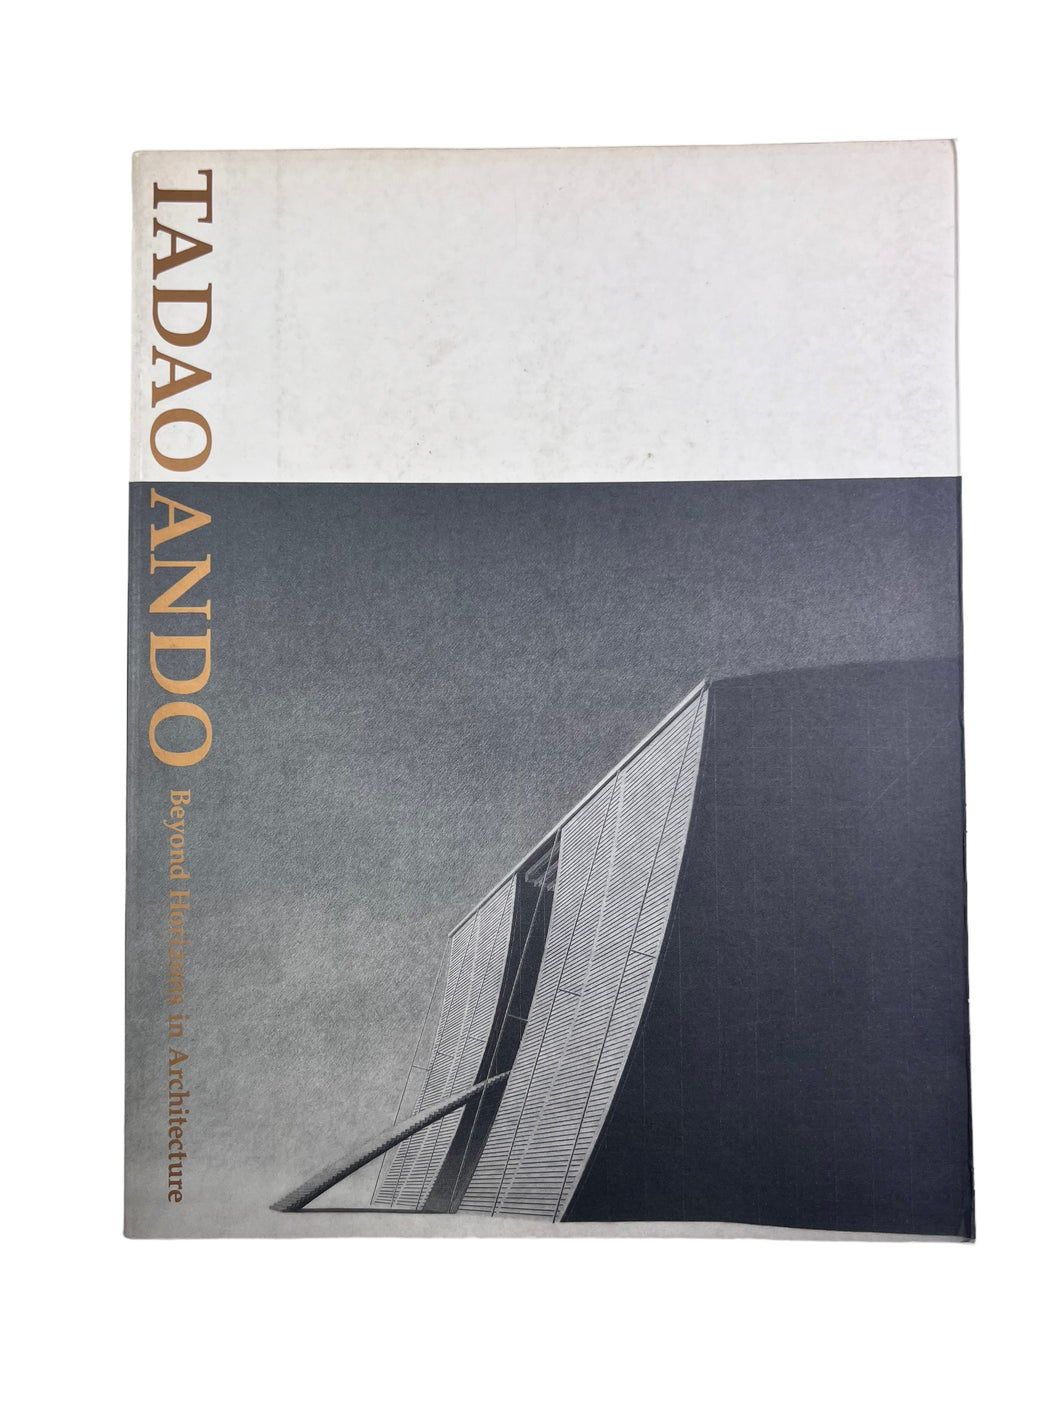 Tadao Ando: Beyond Horizons in Architecture (1992)